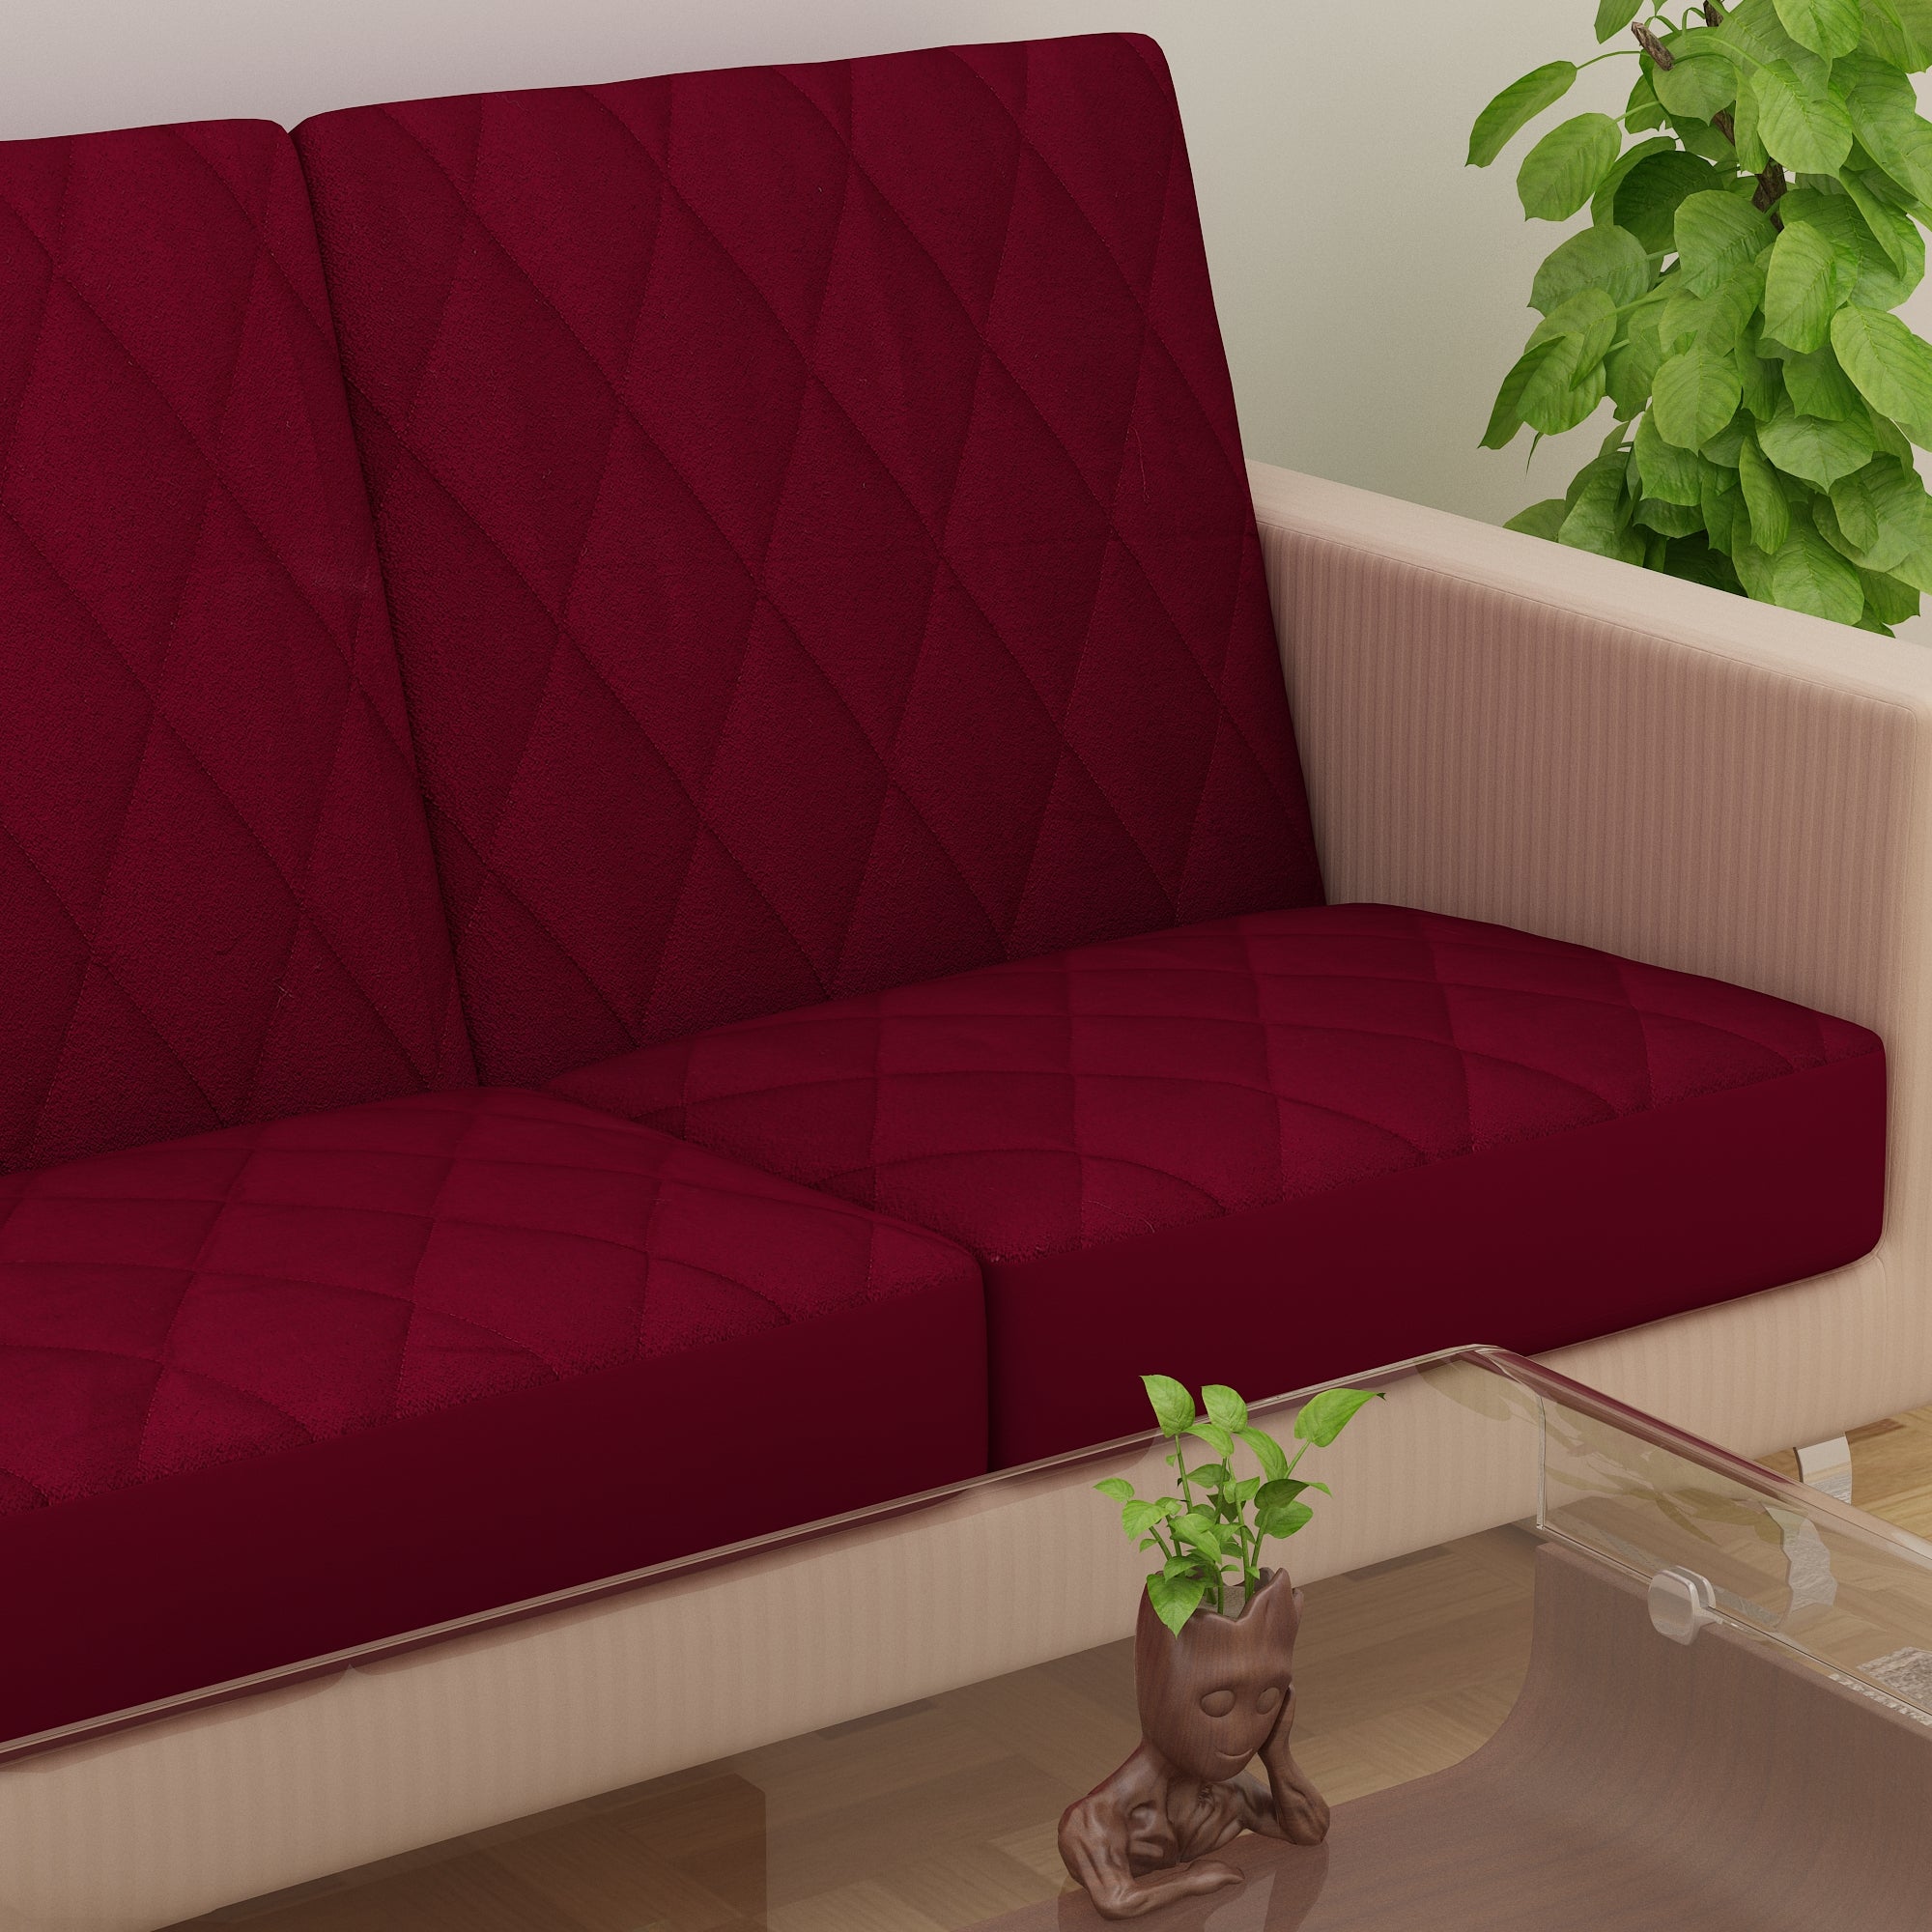 Sapphire Quilted Waterproof Sofa Seat Protector Cover with Stretchable Elastic, Maroon